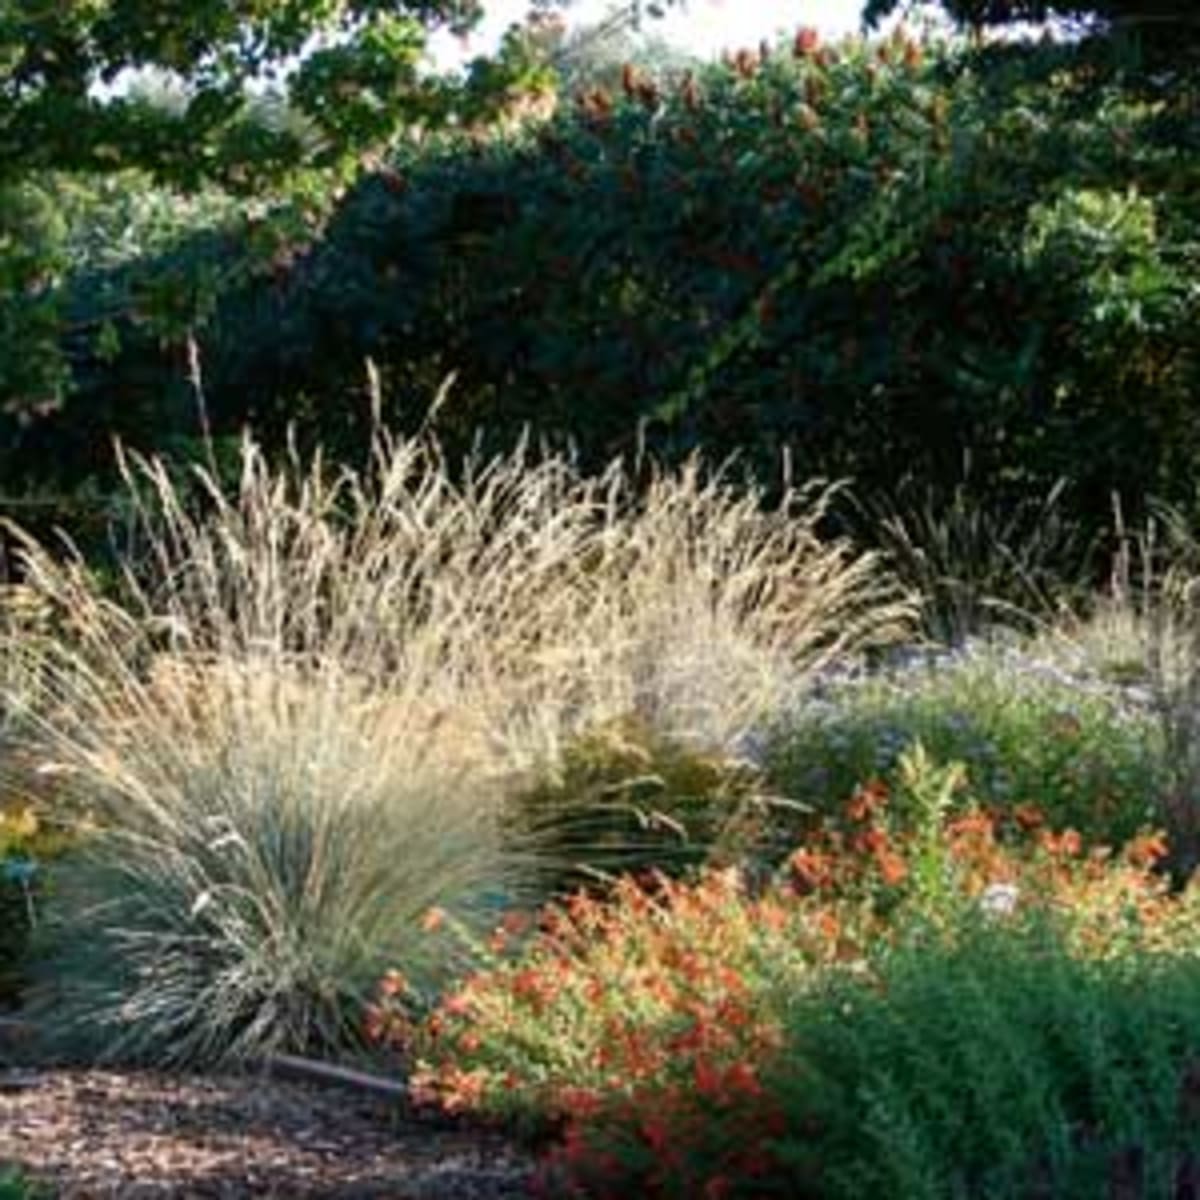 Ornamental Grasses For A Small Garden Space Horticulture,Tuxedo Cats Gray